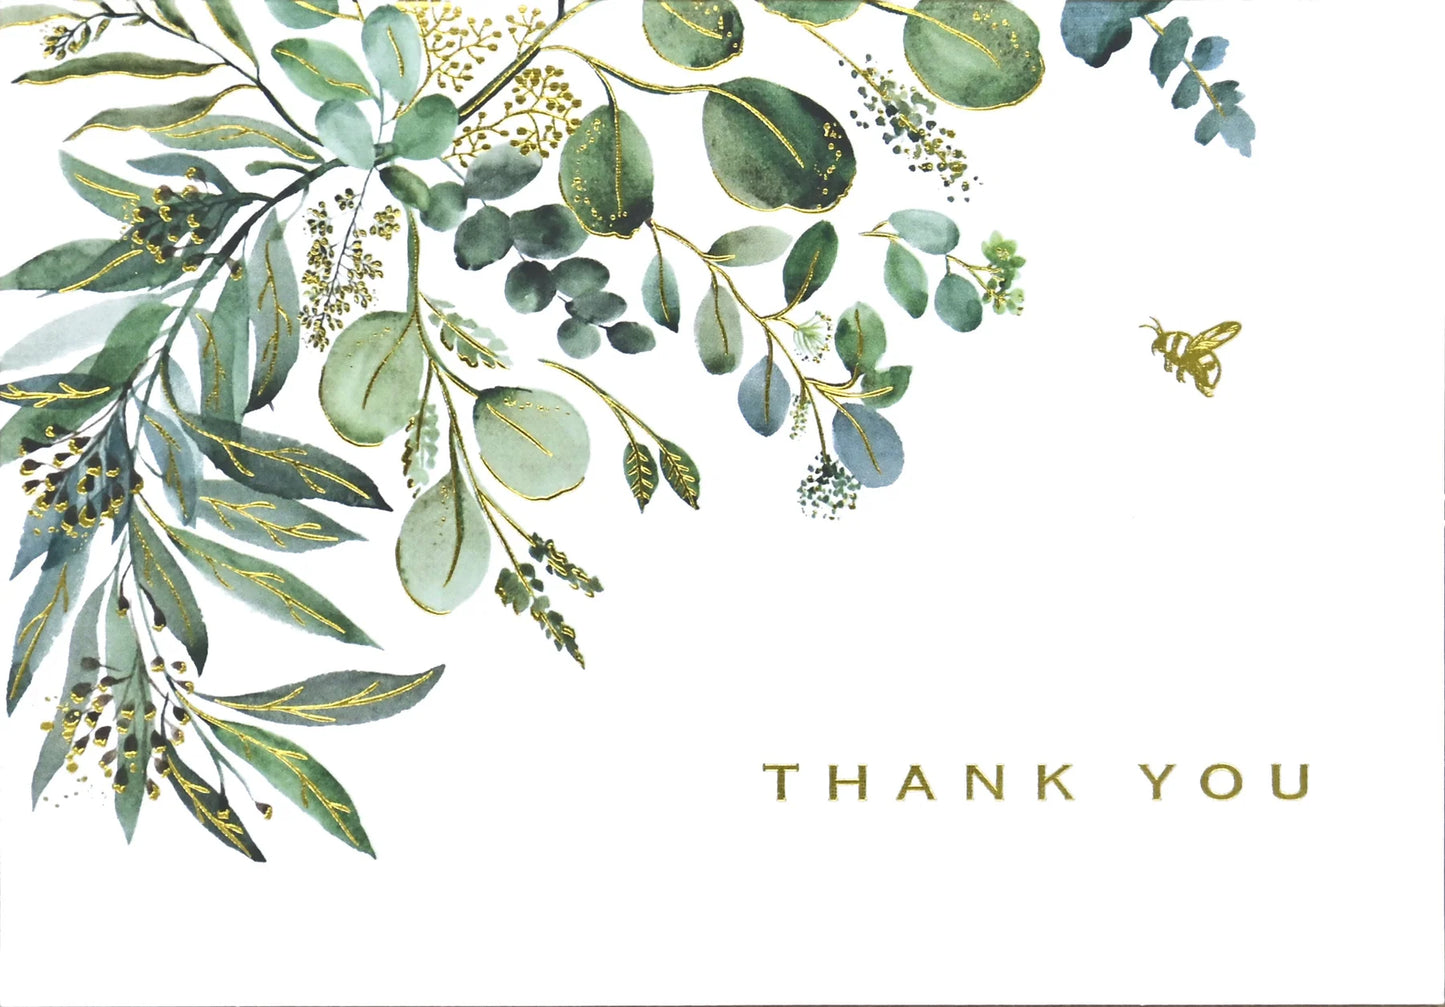 Boxed Thank You Cards